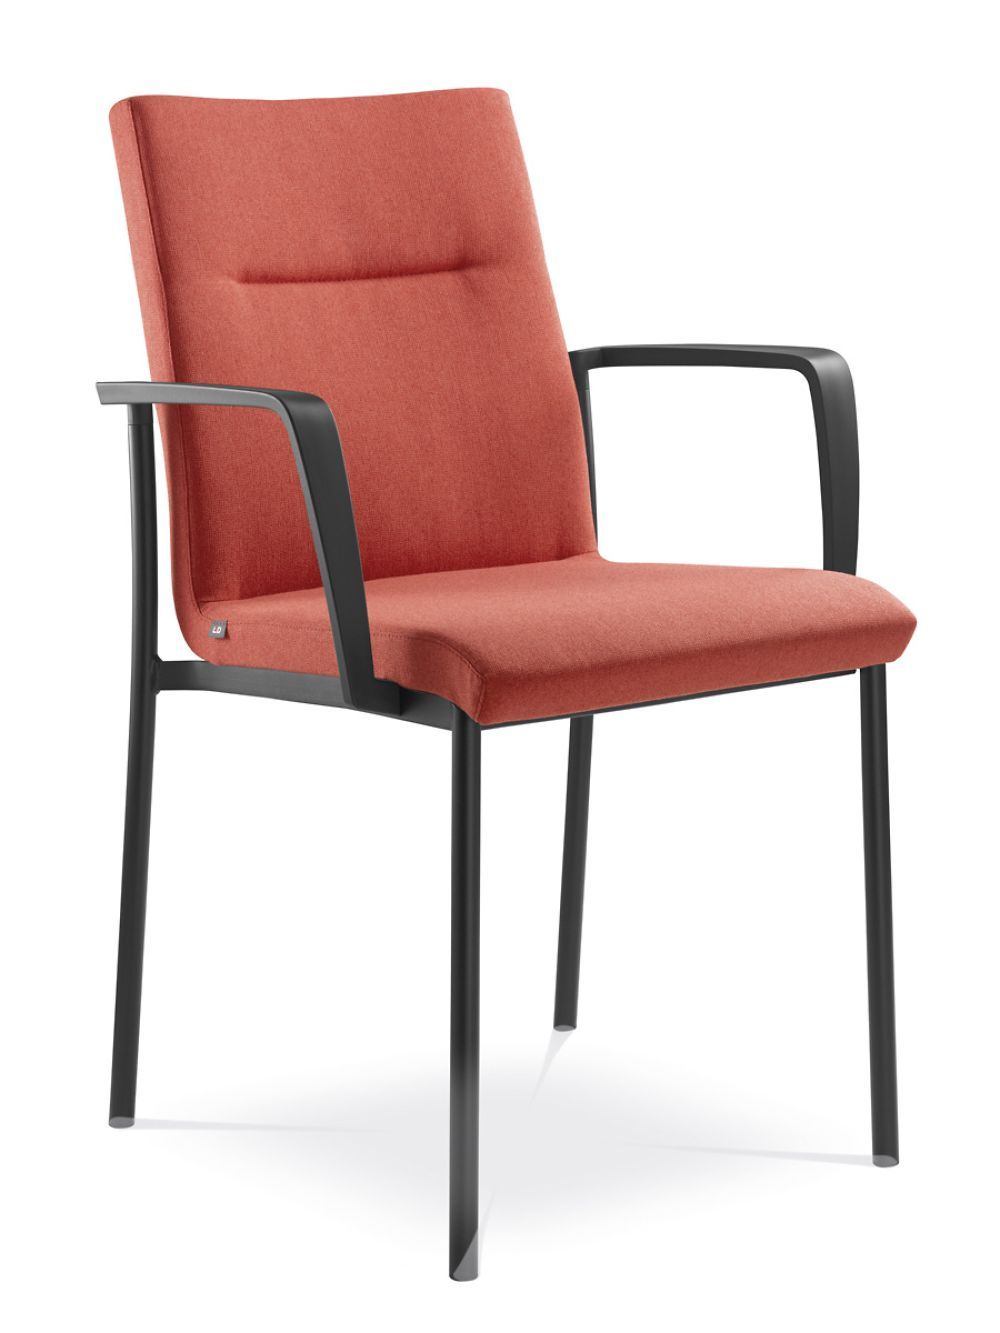 LD SEATING - Židle  SEANCE CARE 070-BR-N1 - 